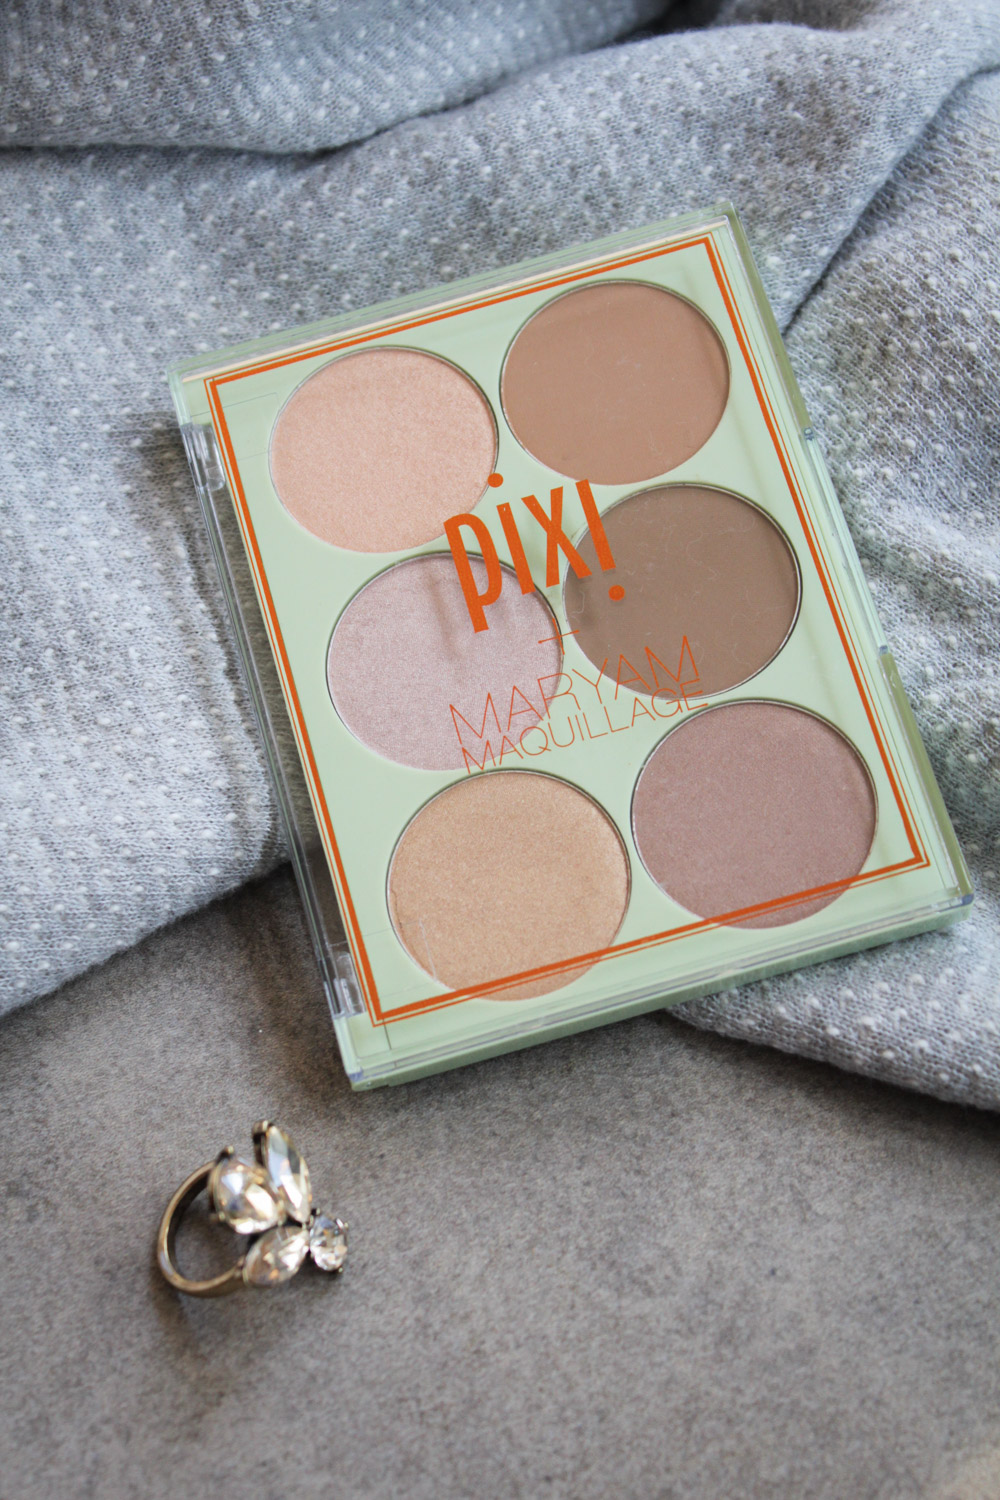 contouring for beginners - use the Strobe & Bronze Palette from Pixi Beauty